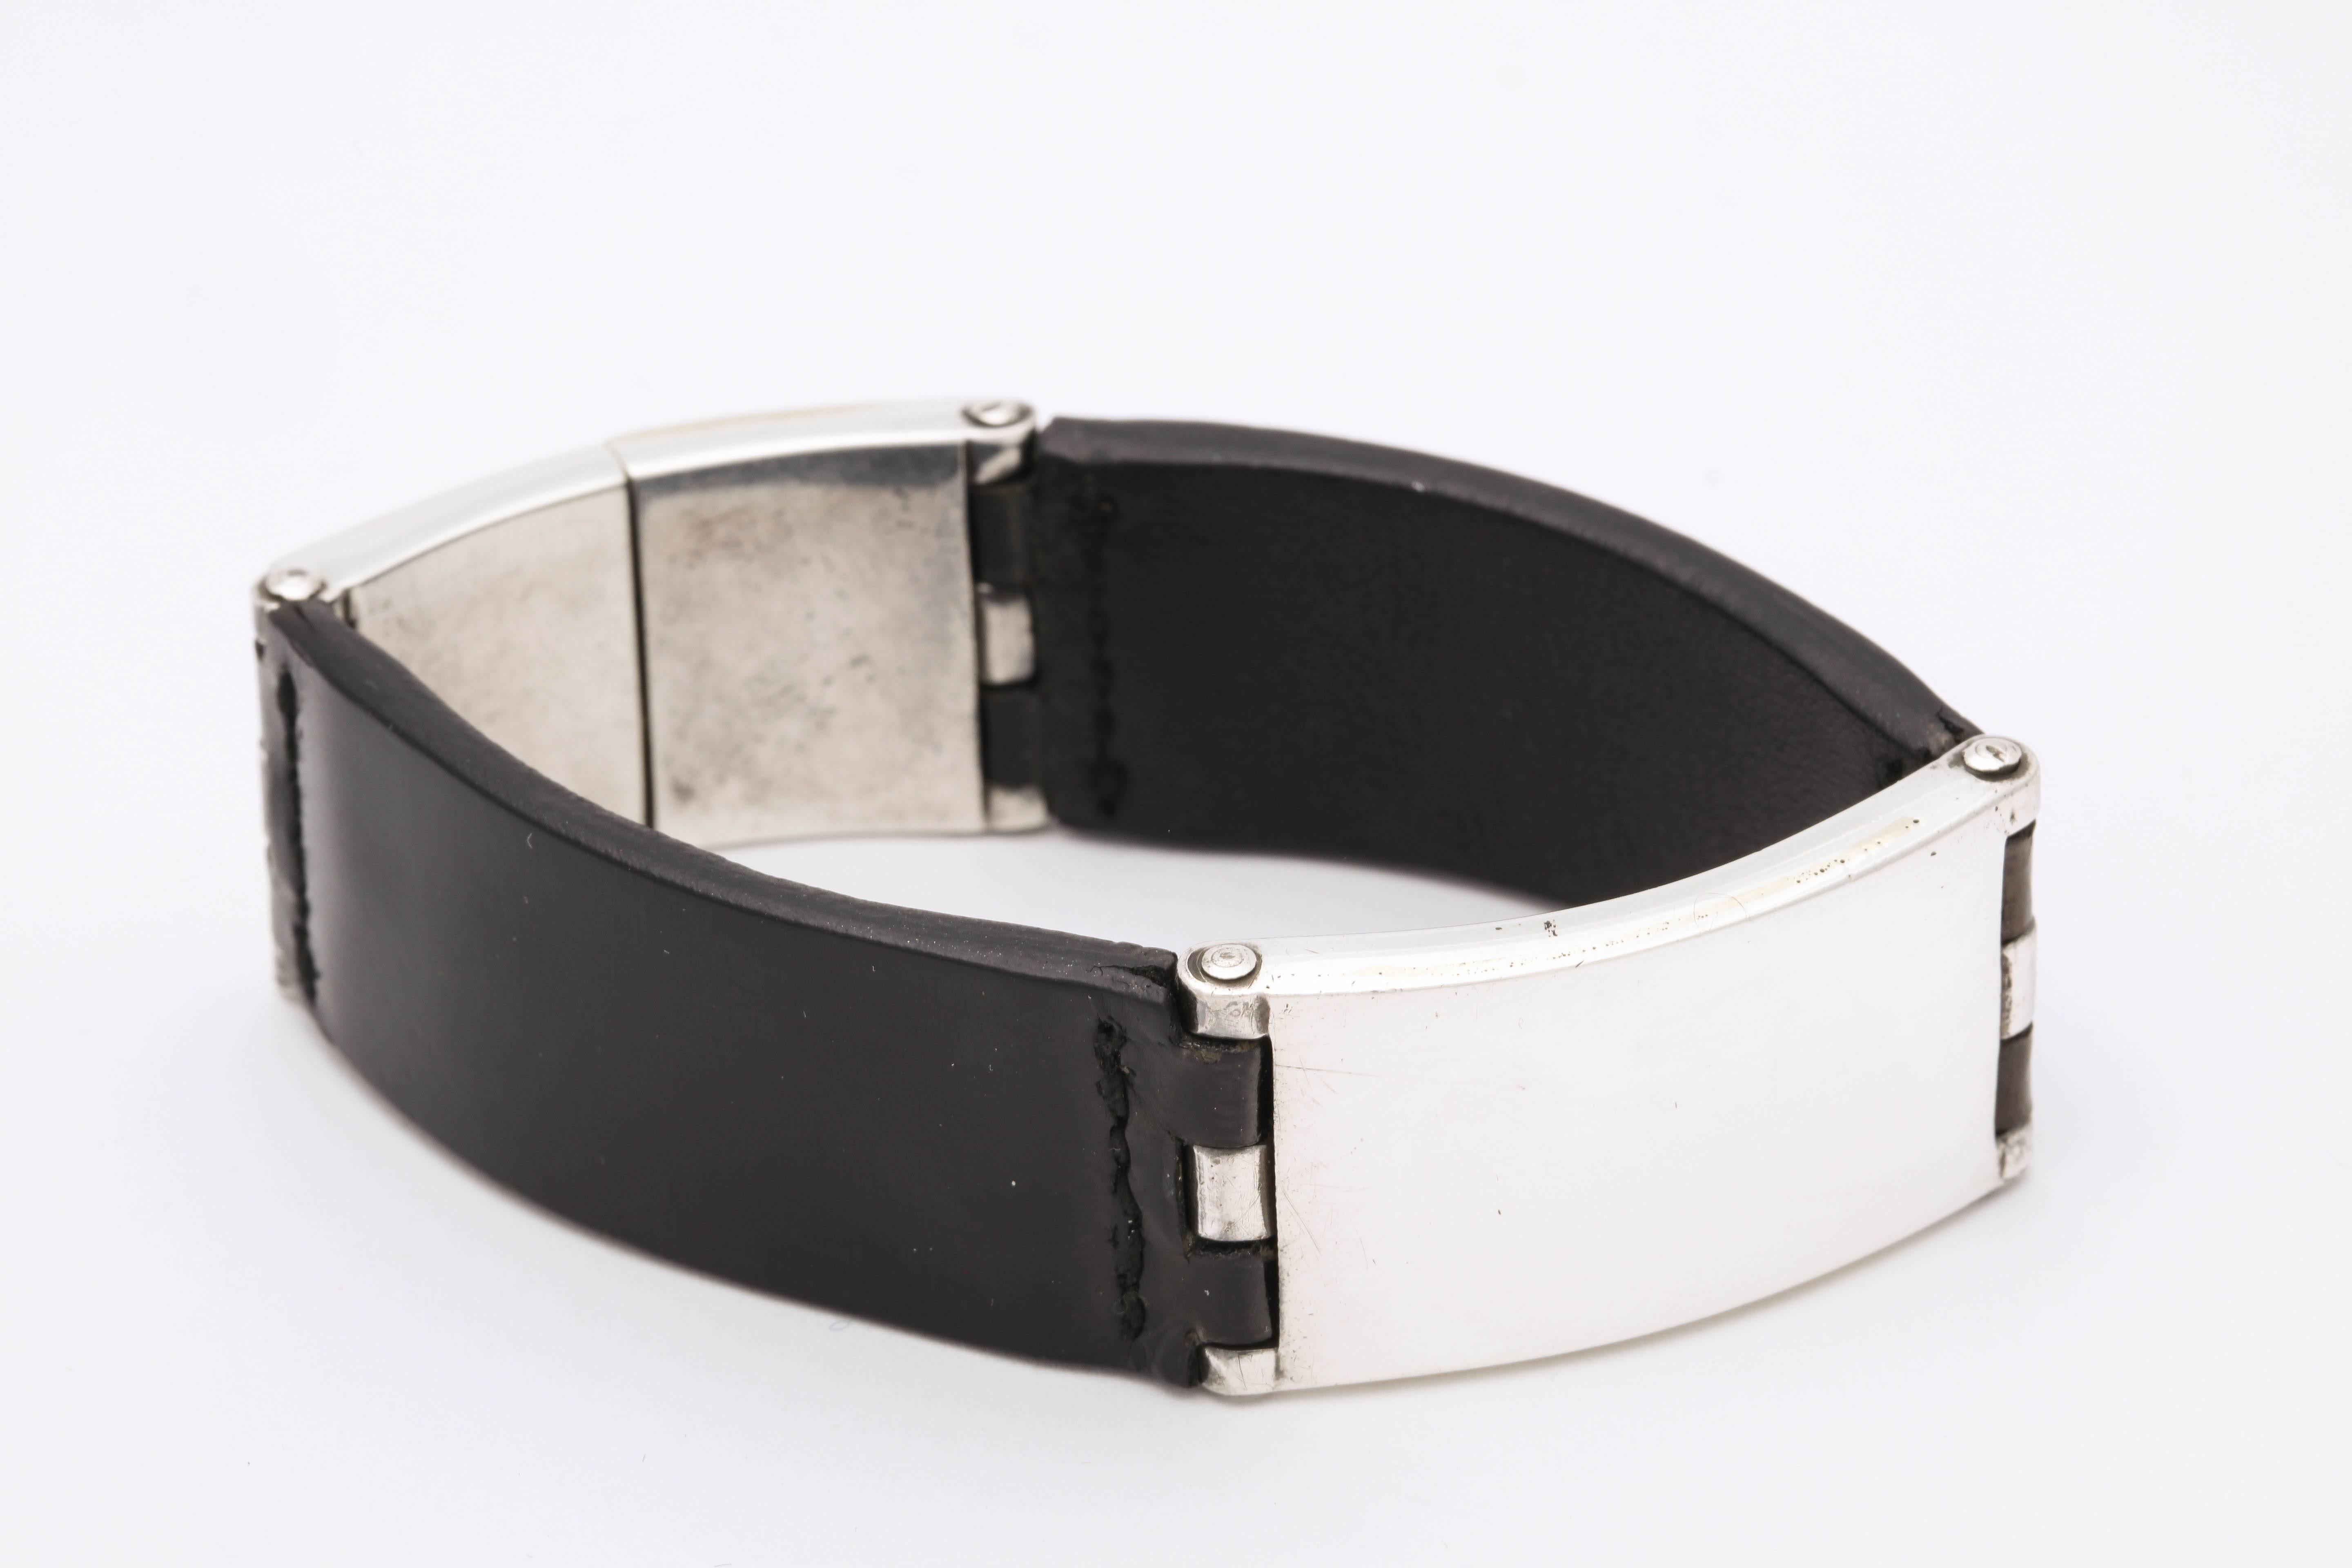 One Ladies Sterling Silver Chic And Hip Stylized Flexible Bracelet Designed With Alternating Deep Brown Chocolate Leather Straps And with alternating Sterling silver Panels. Created By Gucci In The 1980's And Made In Italy. Note: Bracelet Is Signed